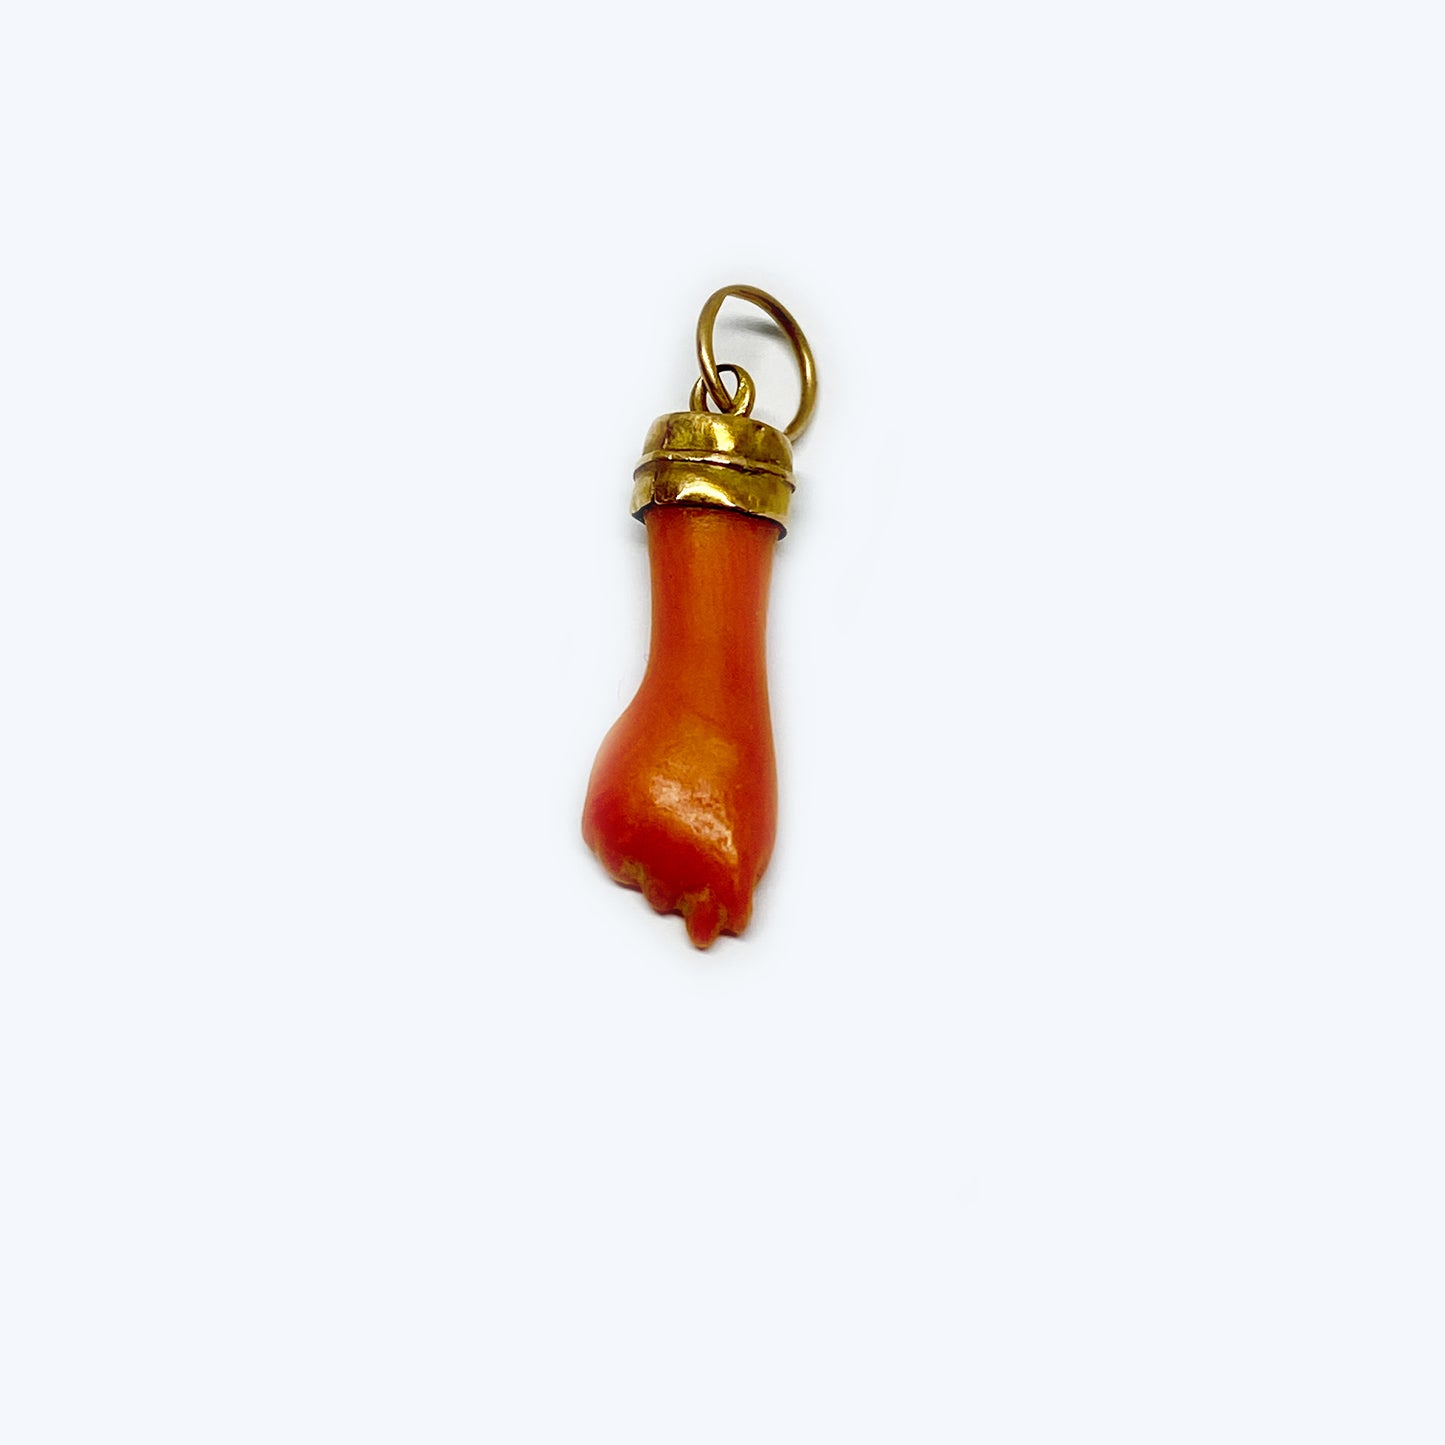 Antique 18k Gold Coral Figa Charm